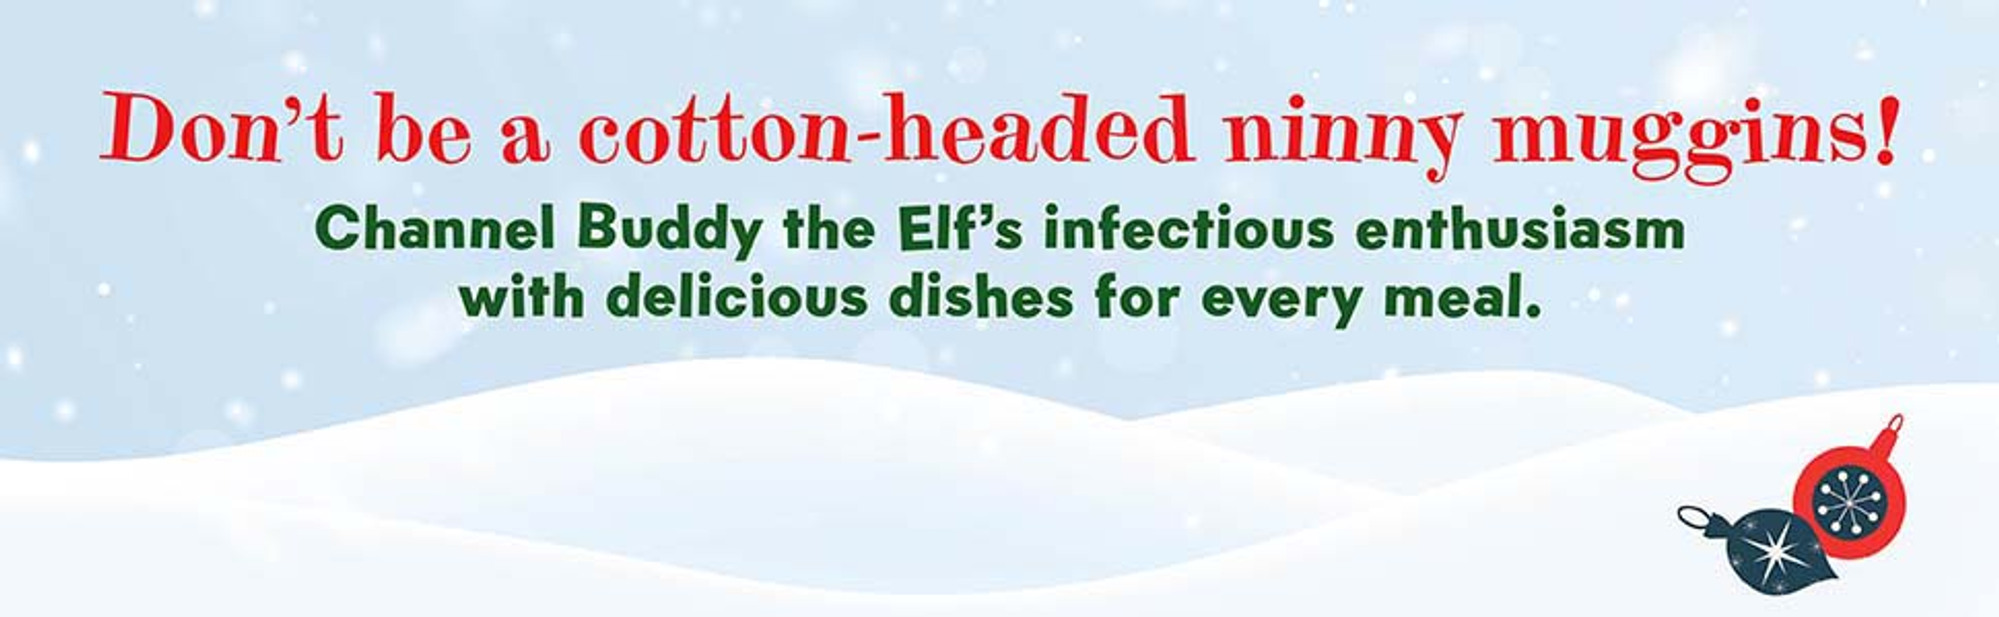 The Unofficial Elf Cookbook channels Buddy the Elf’s infectious enthusiasm via delicious dishes for every meal, (including recipes with the four elf food groups: candy, candy canes, candy corn and, of course, syrup). 